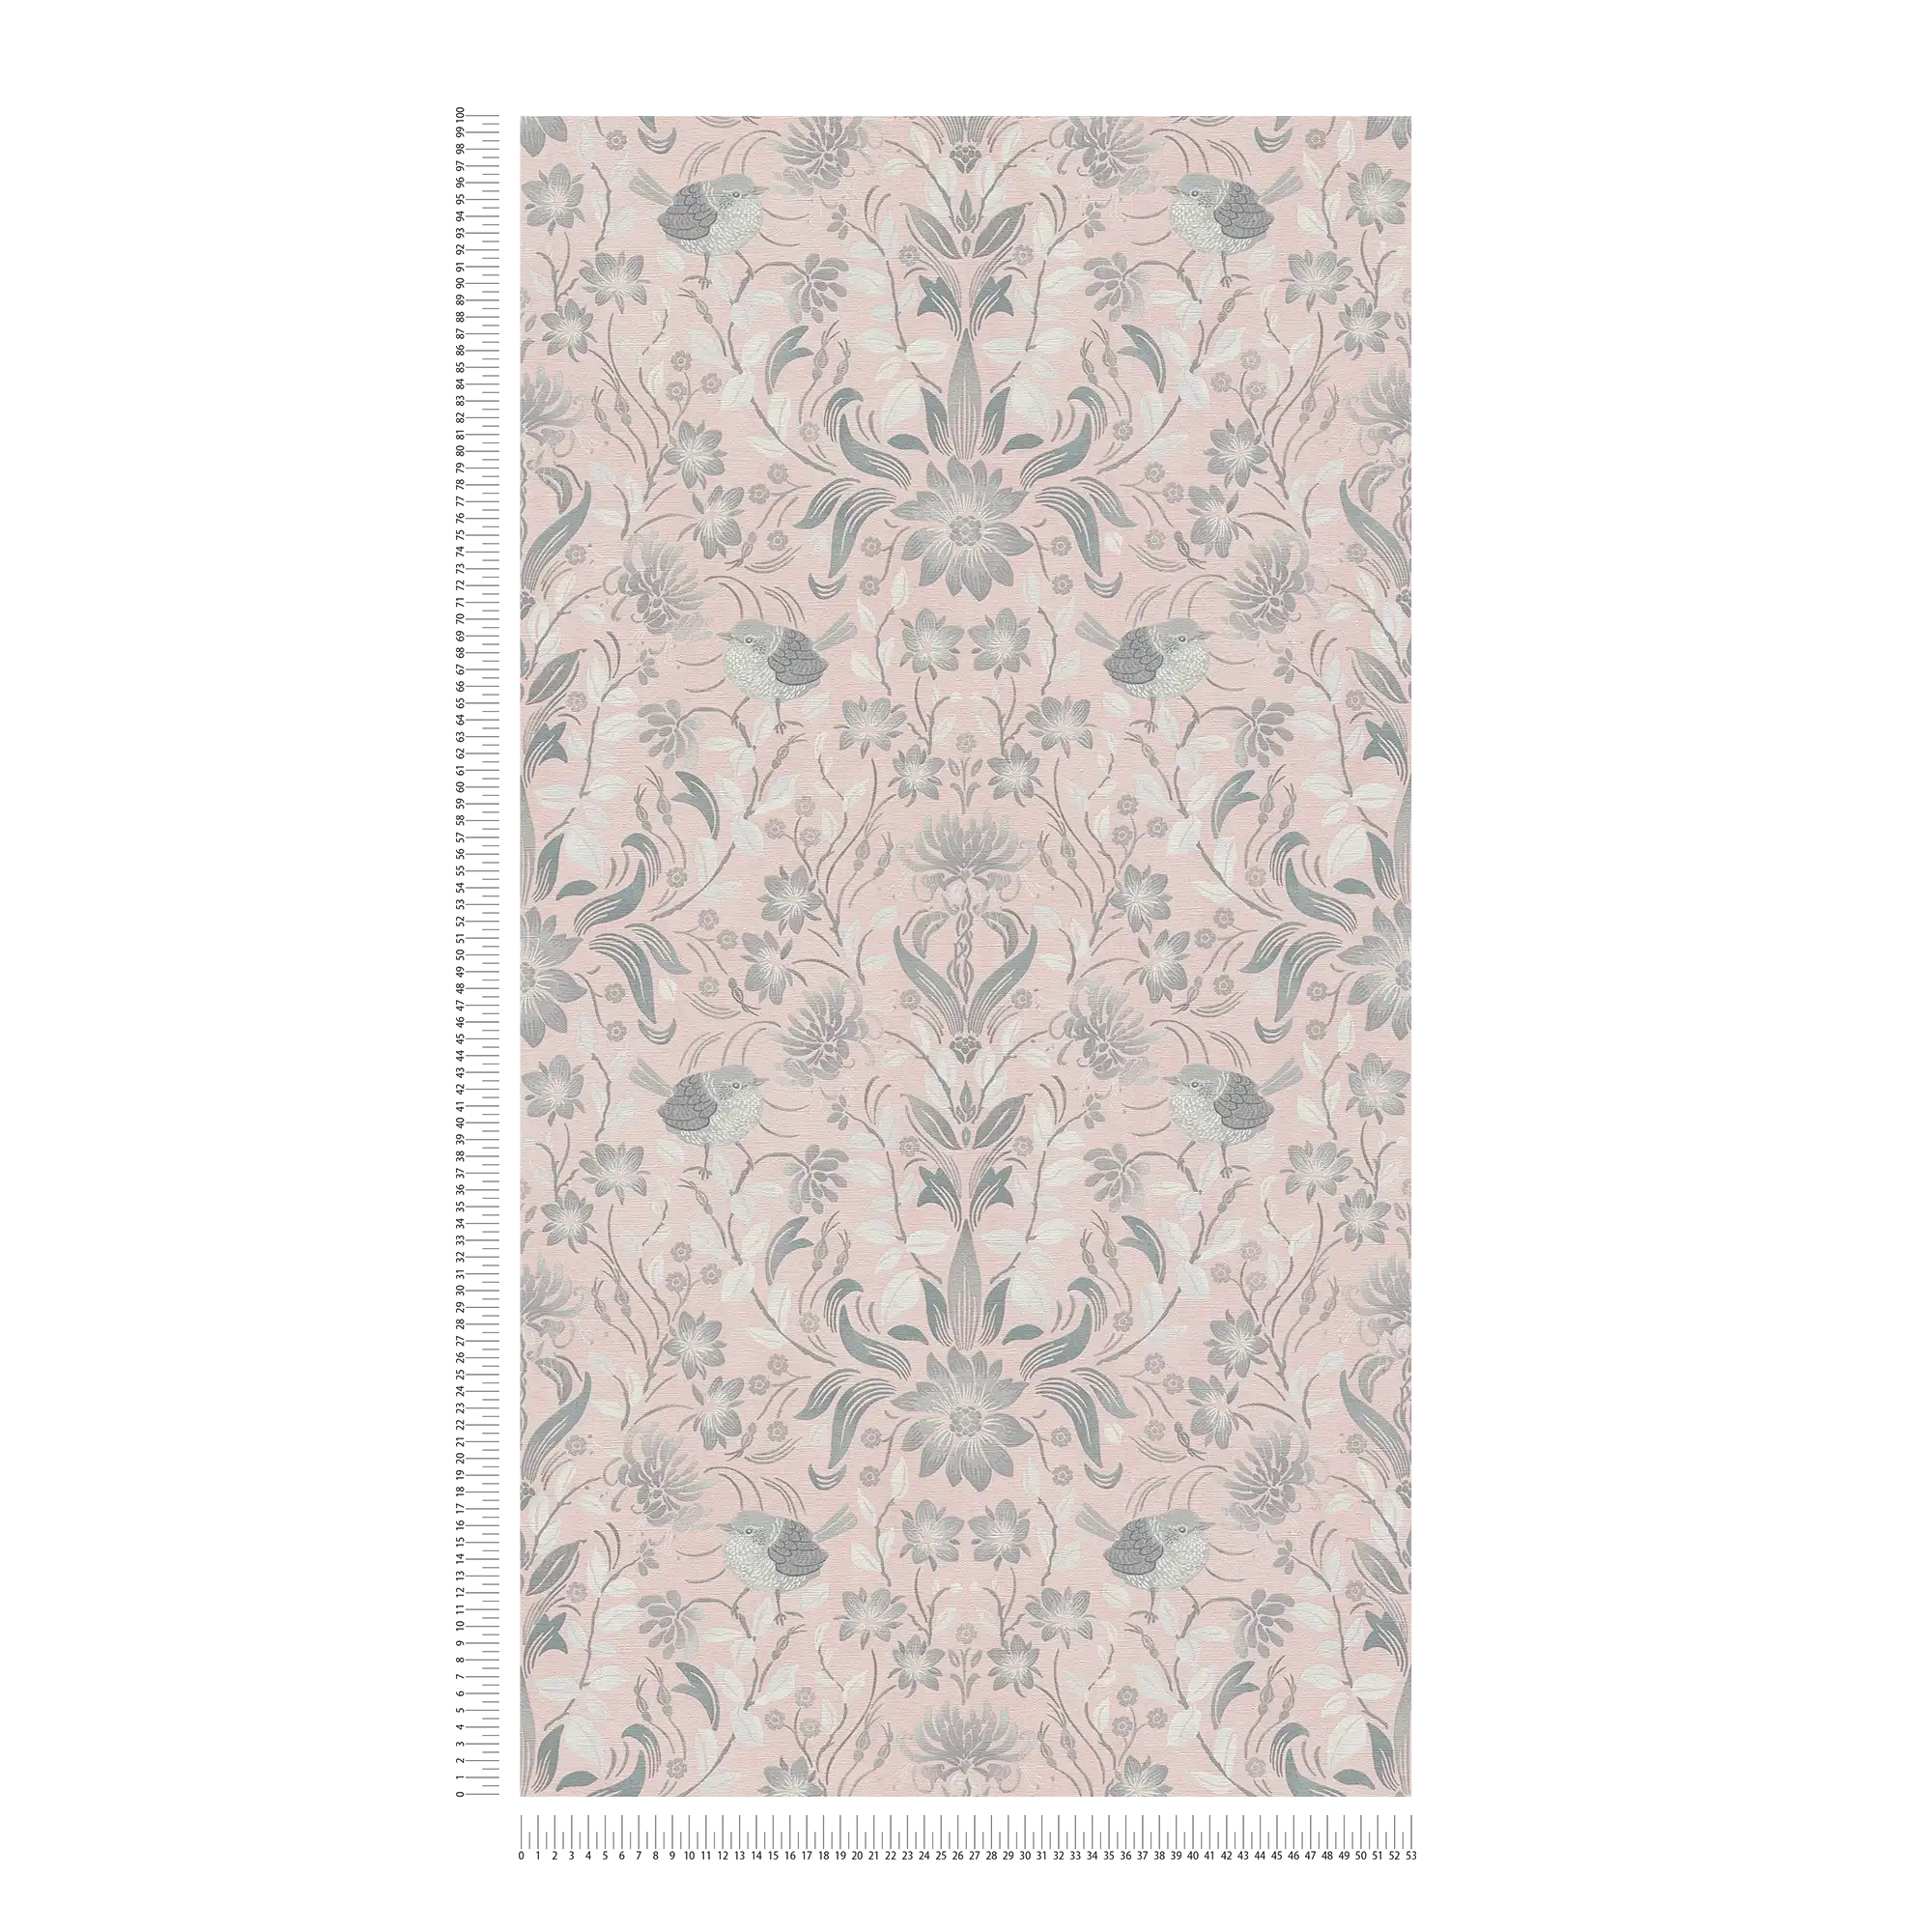             Birds and flowers wallpaper - pink, grey, white
        